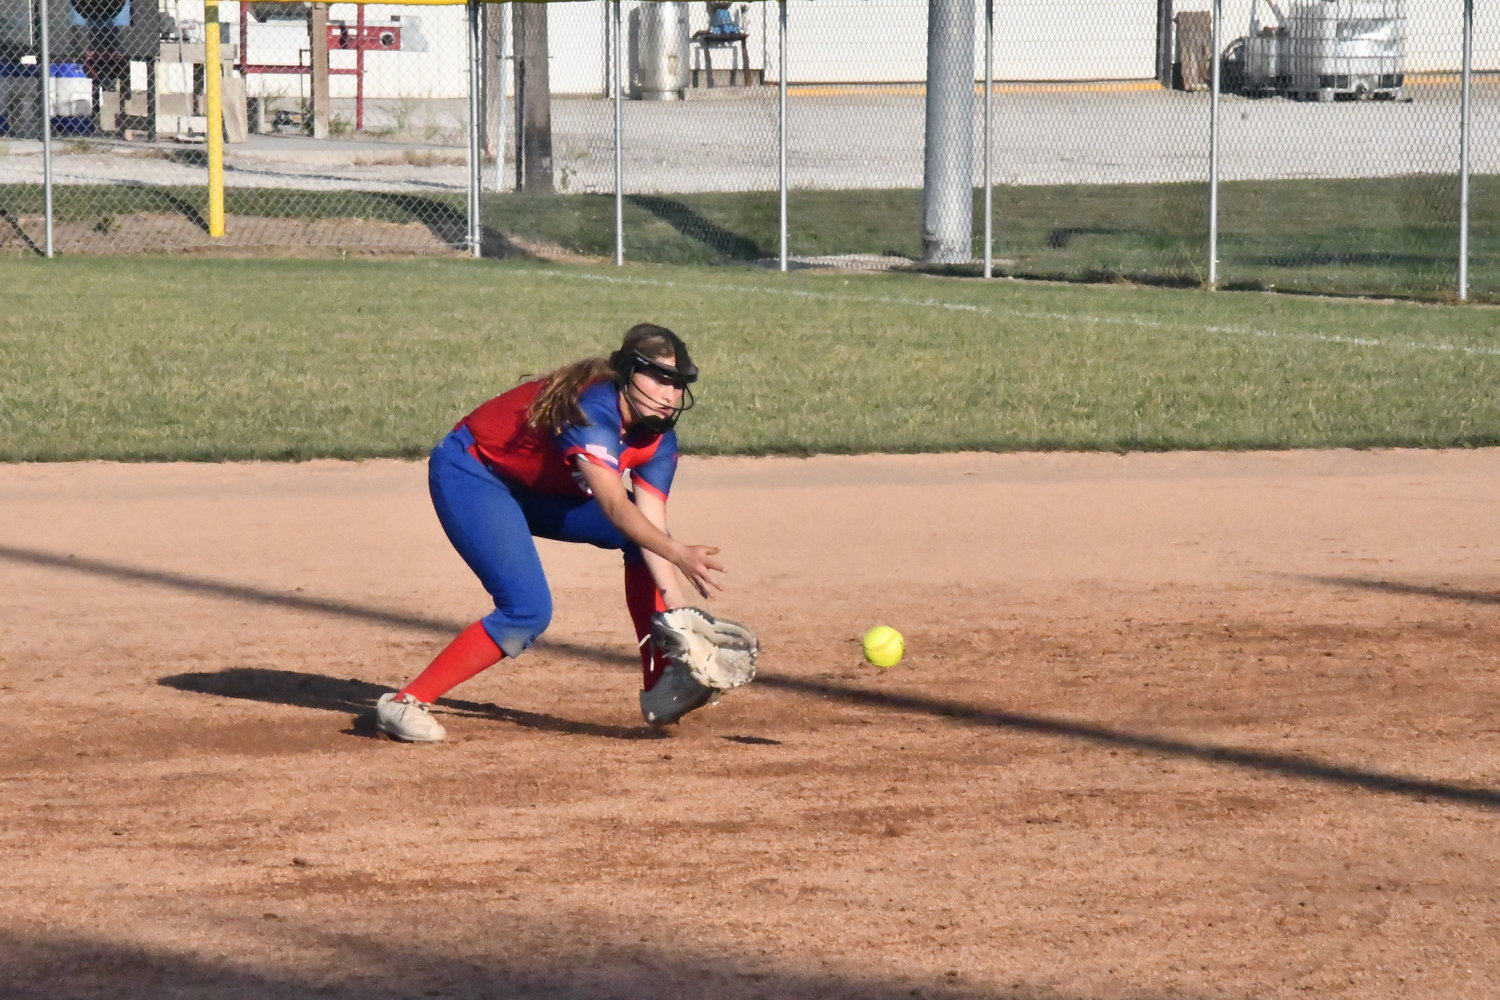 Elizabeth Reisenauer makes a play near second base which resulted in a putout.